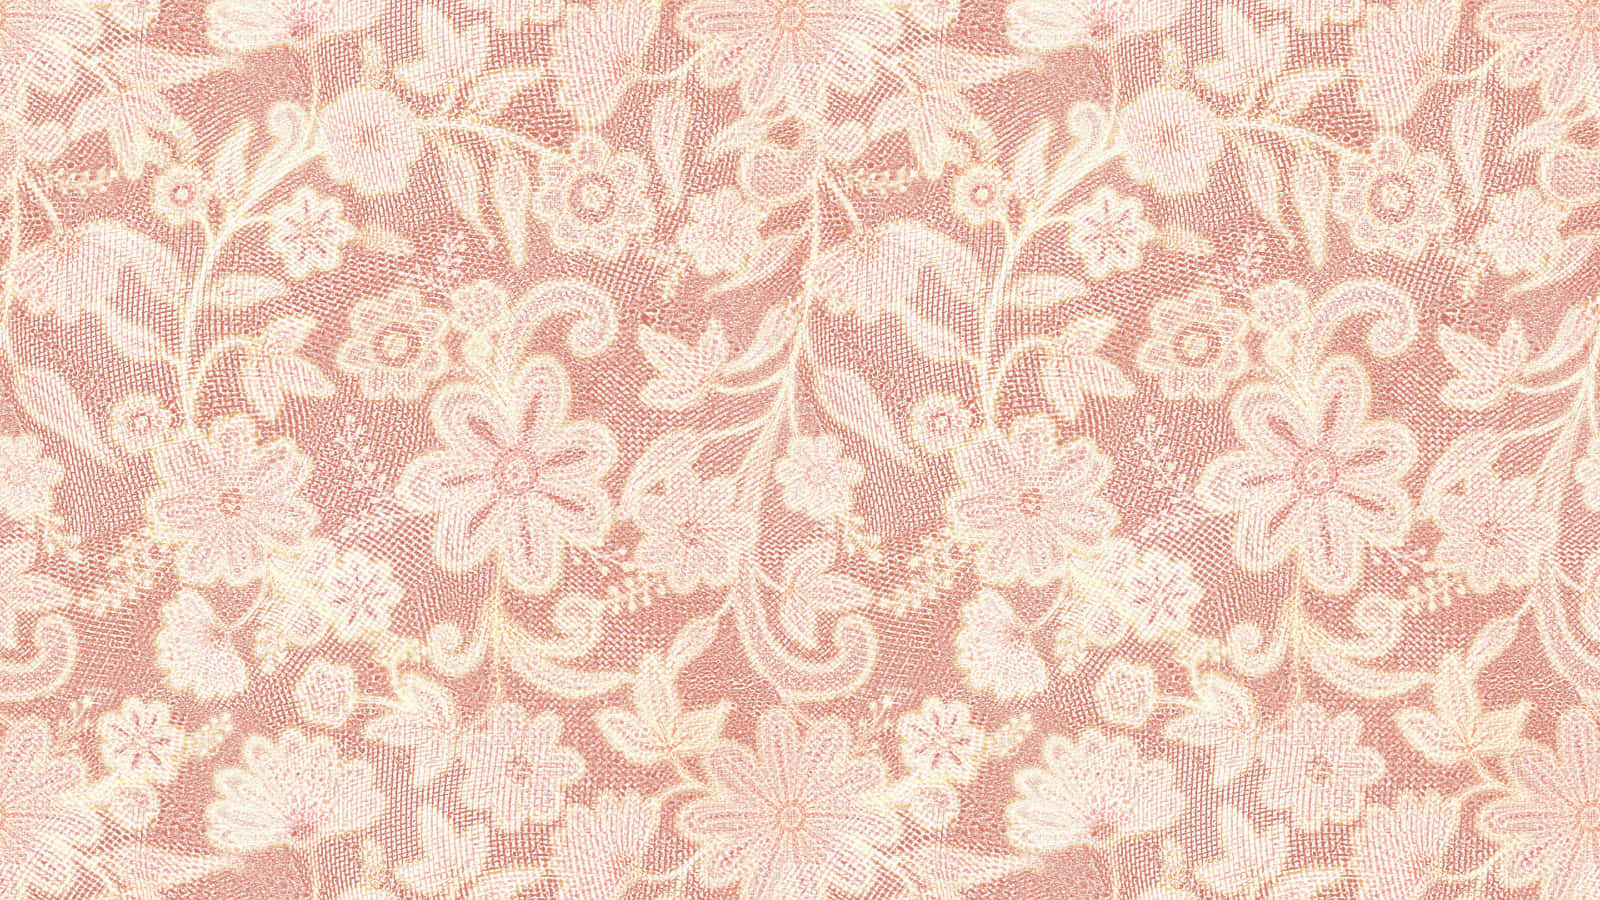 A Pink And White Floral Pattern